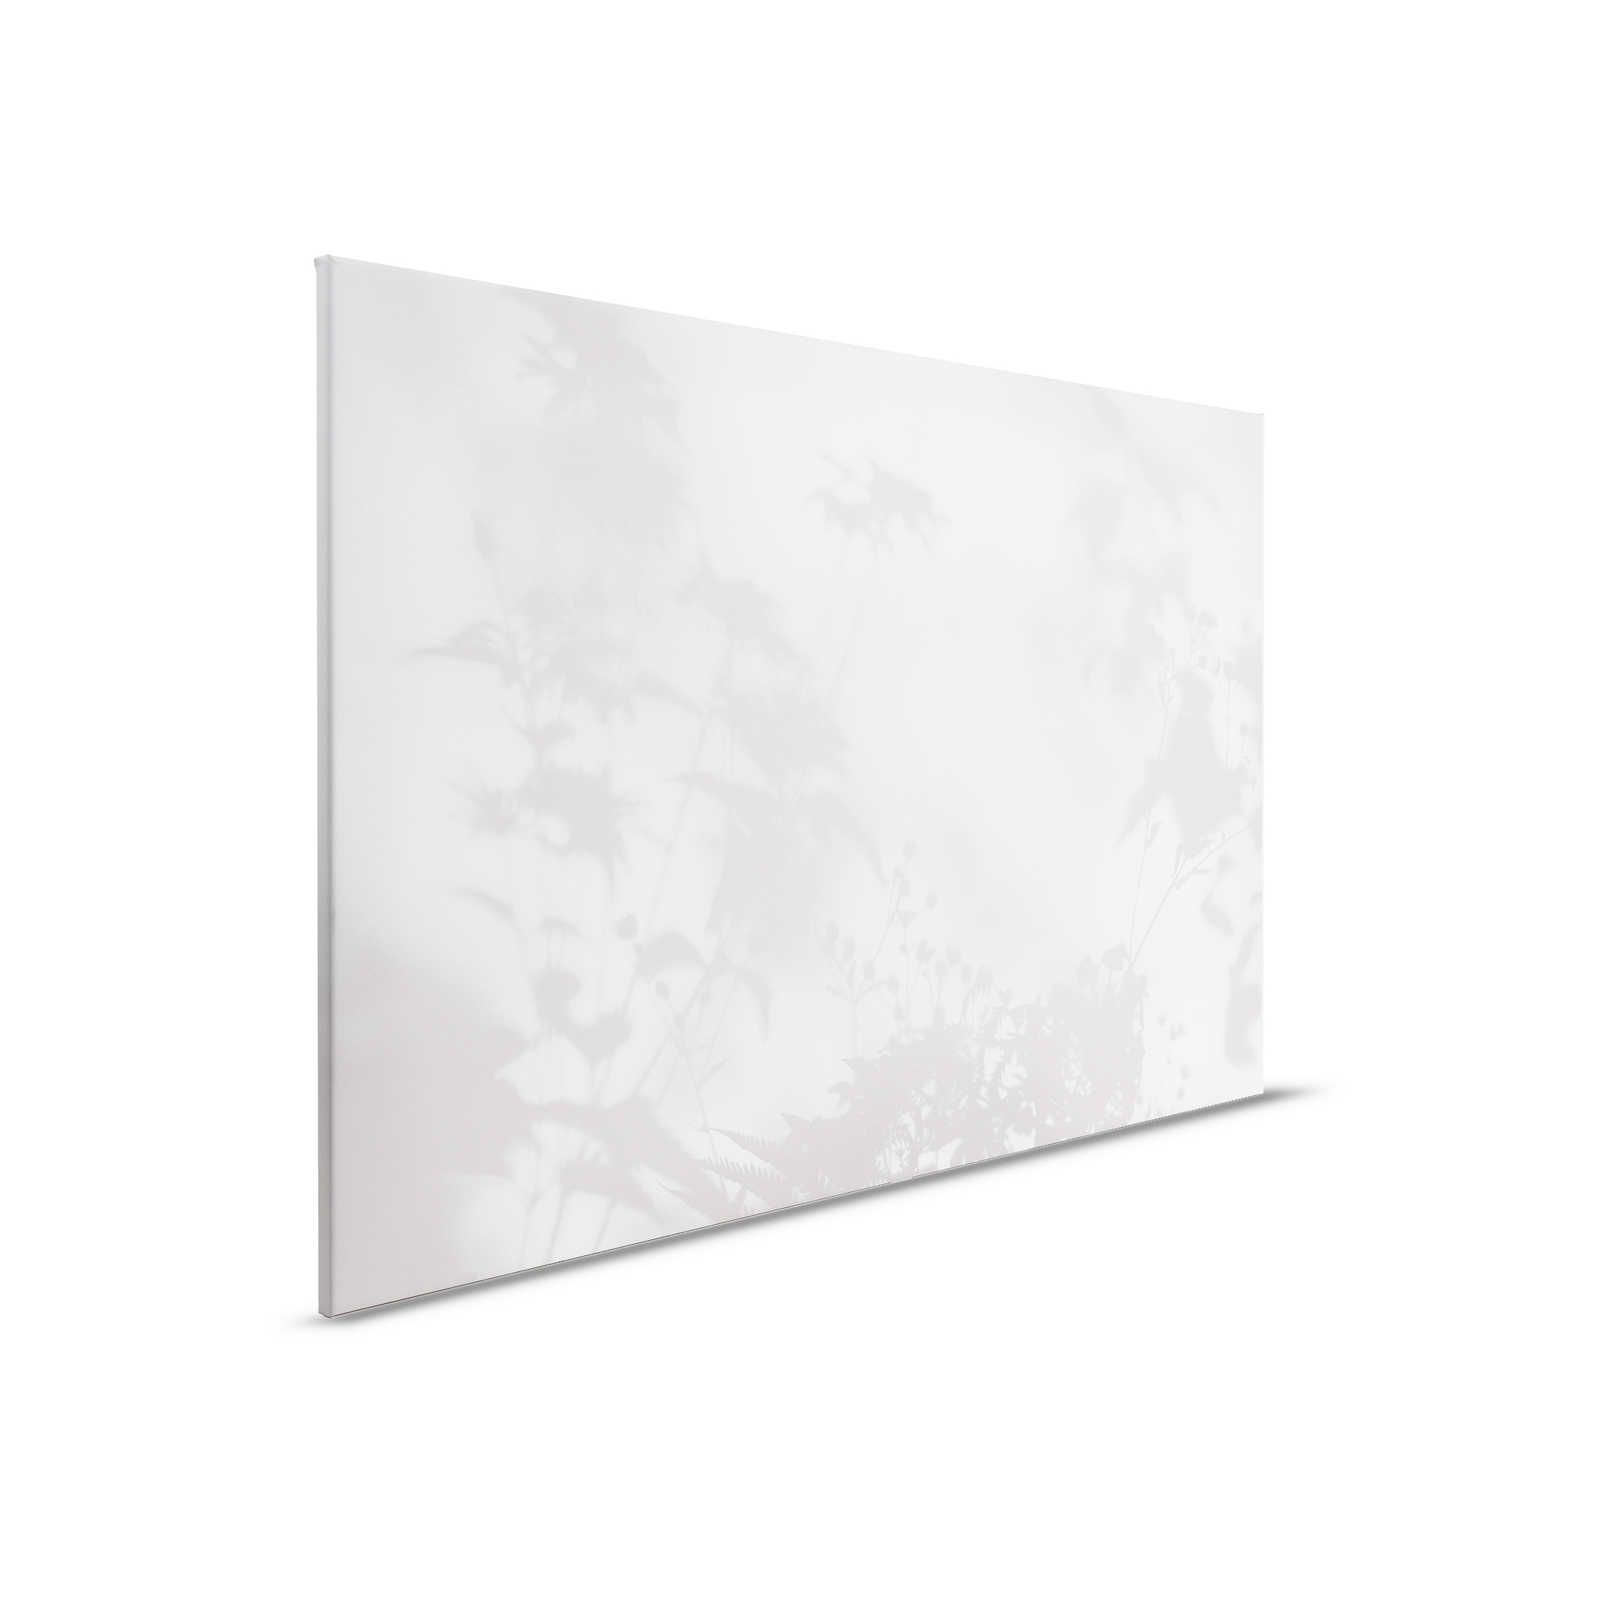 Shadow Room 2 - Nature Canvas Painting Grey & White, Faded Design - 0.90 m x 0.60 m
